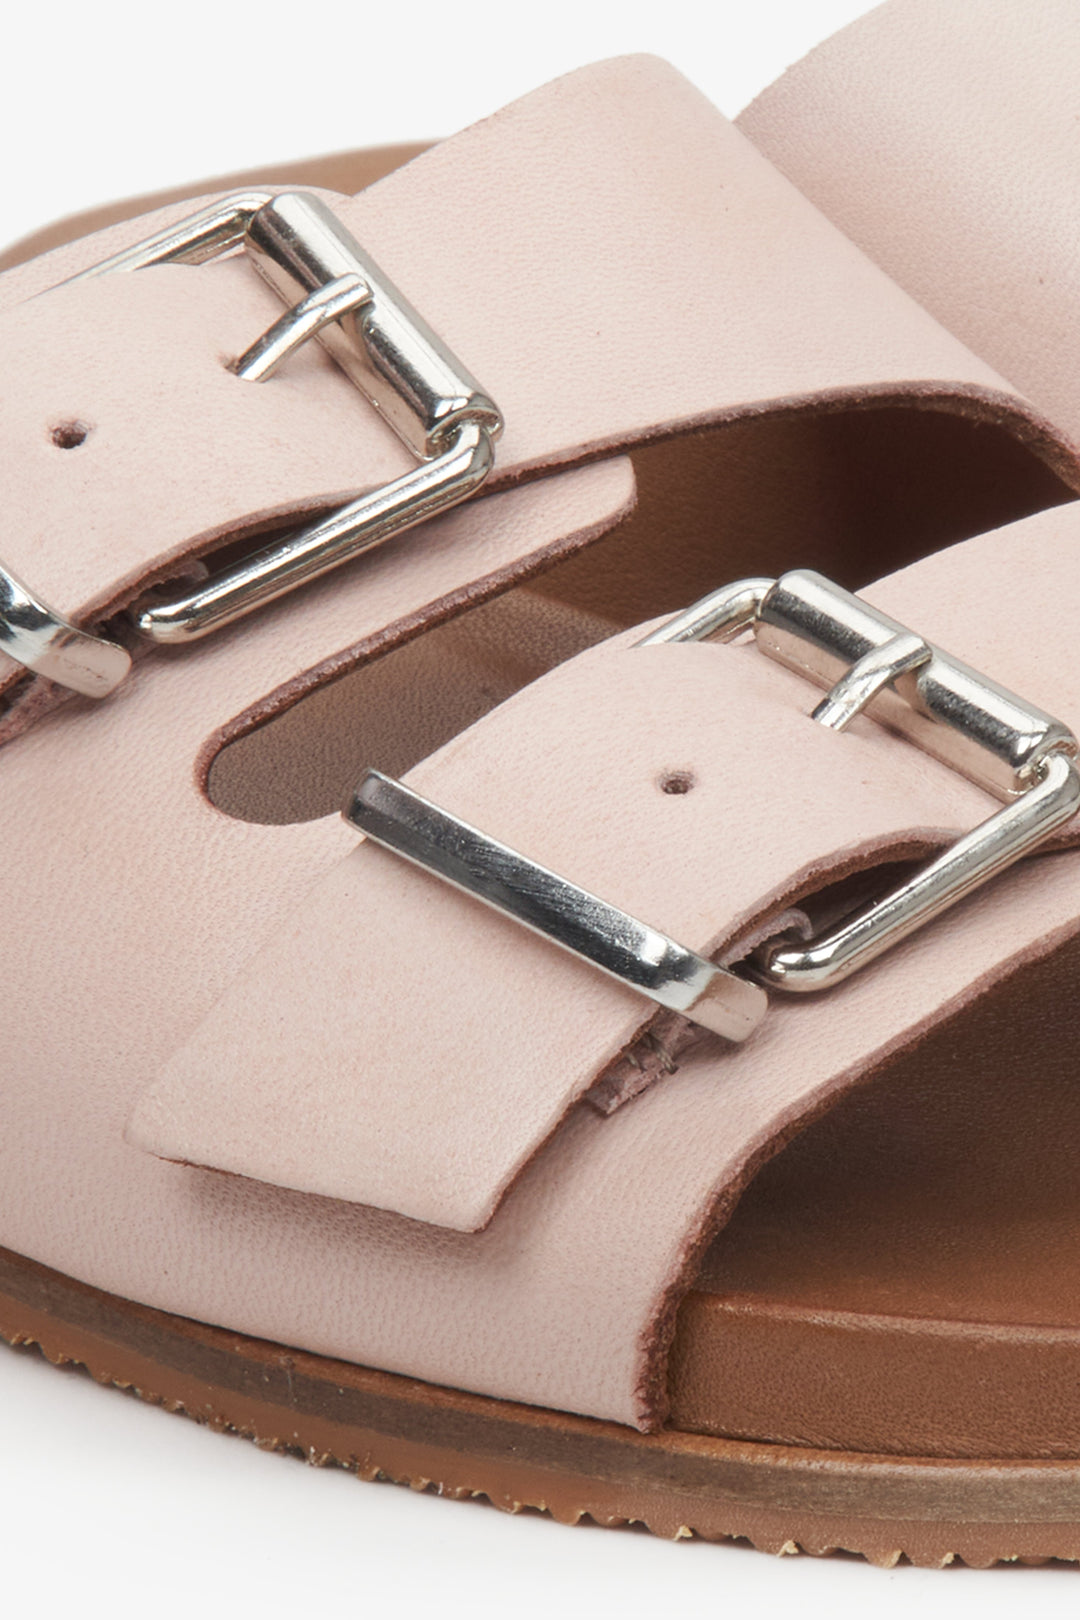 Slide Sandals made of Italian Leather in pale link - close-up on the straps and silver buckles.